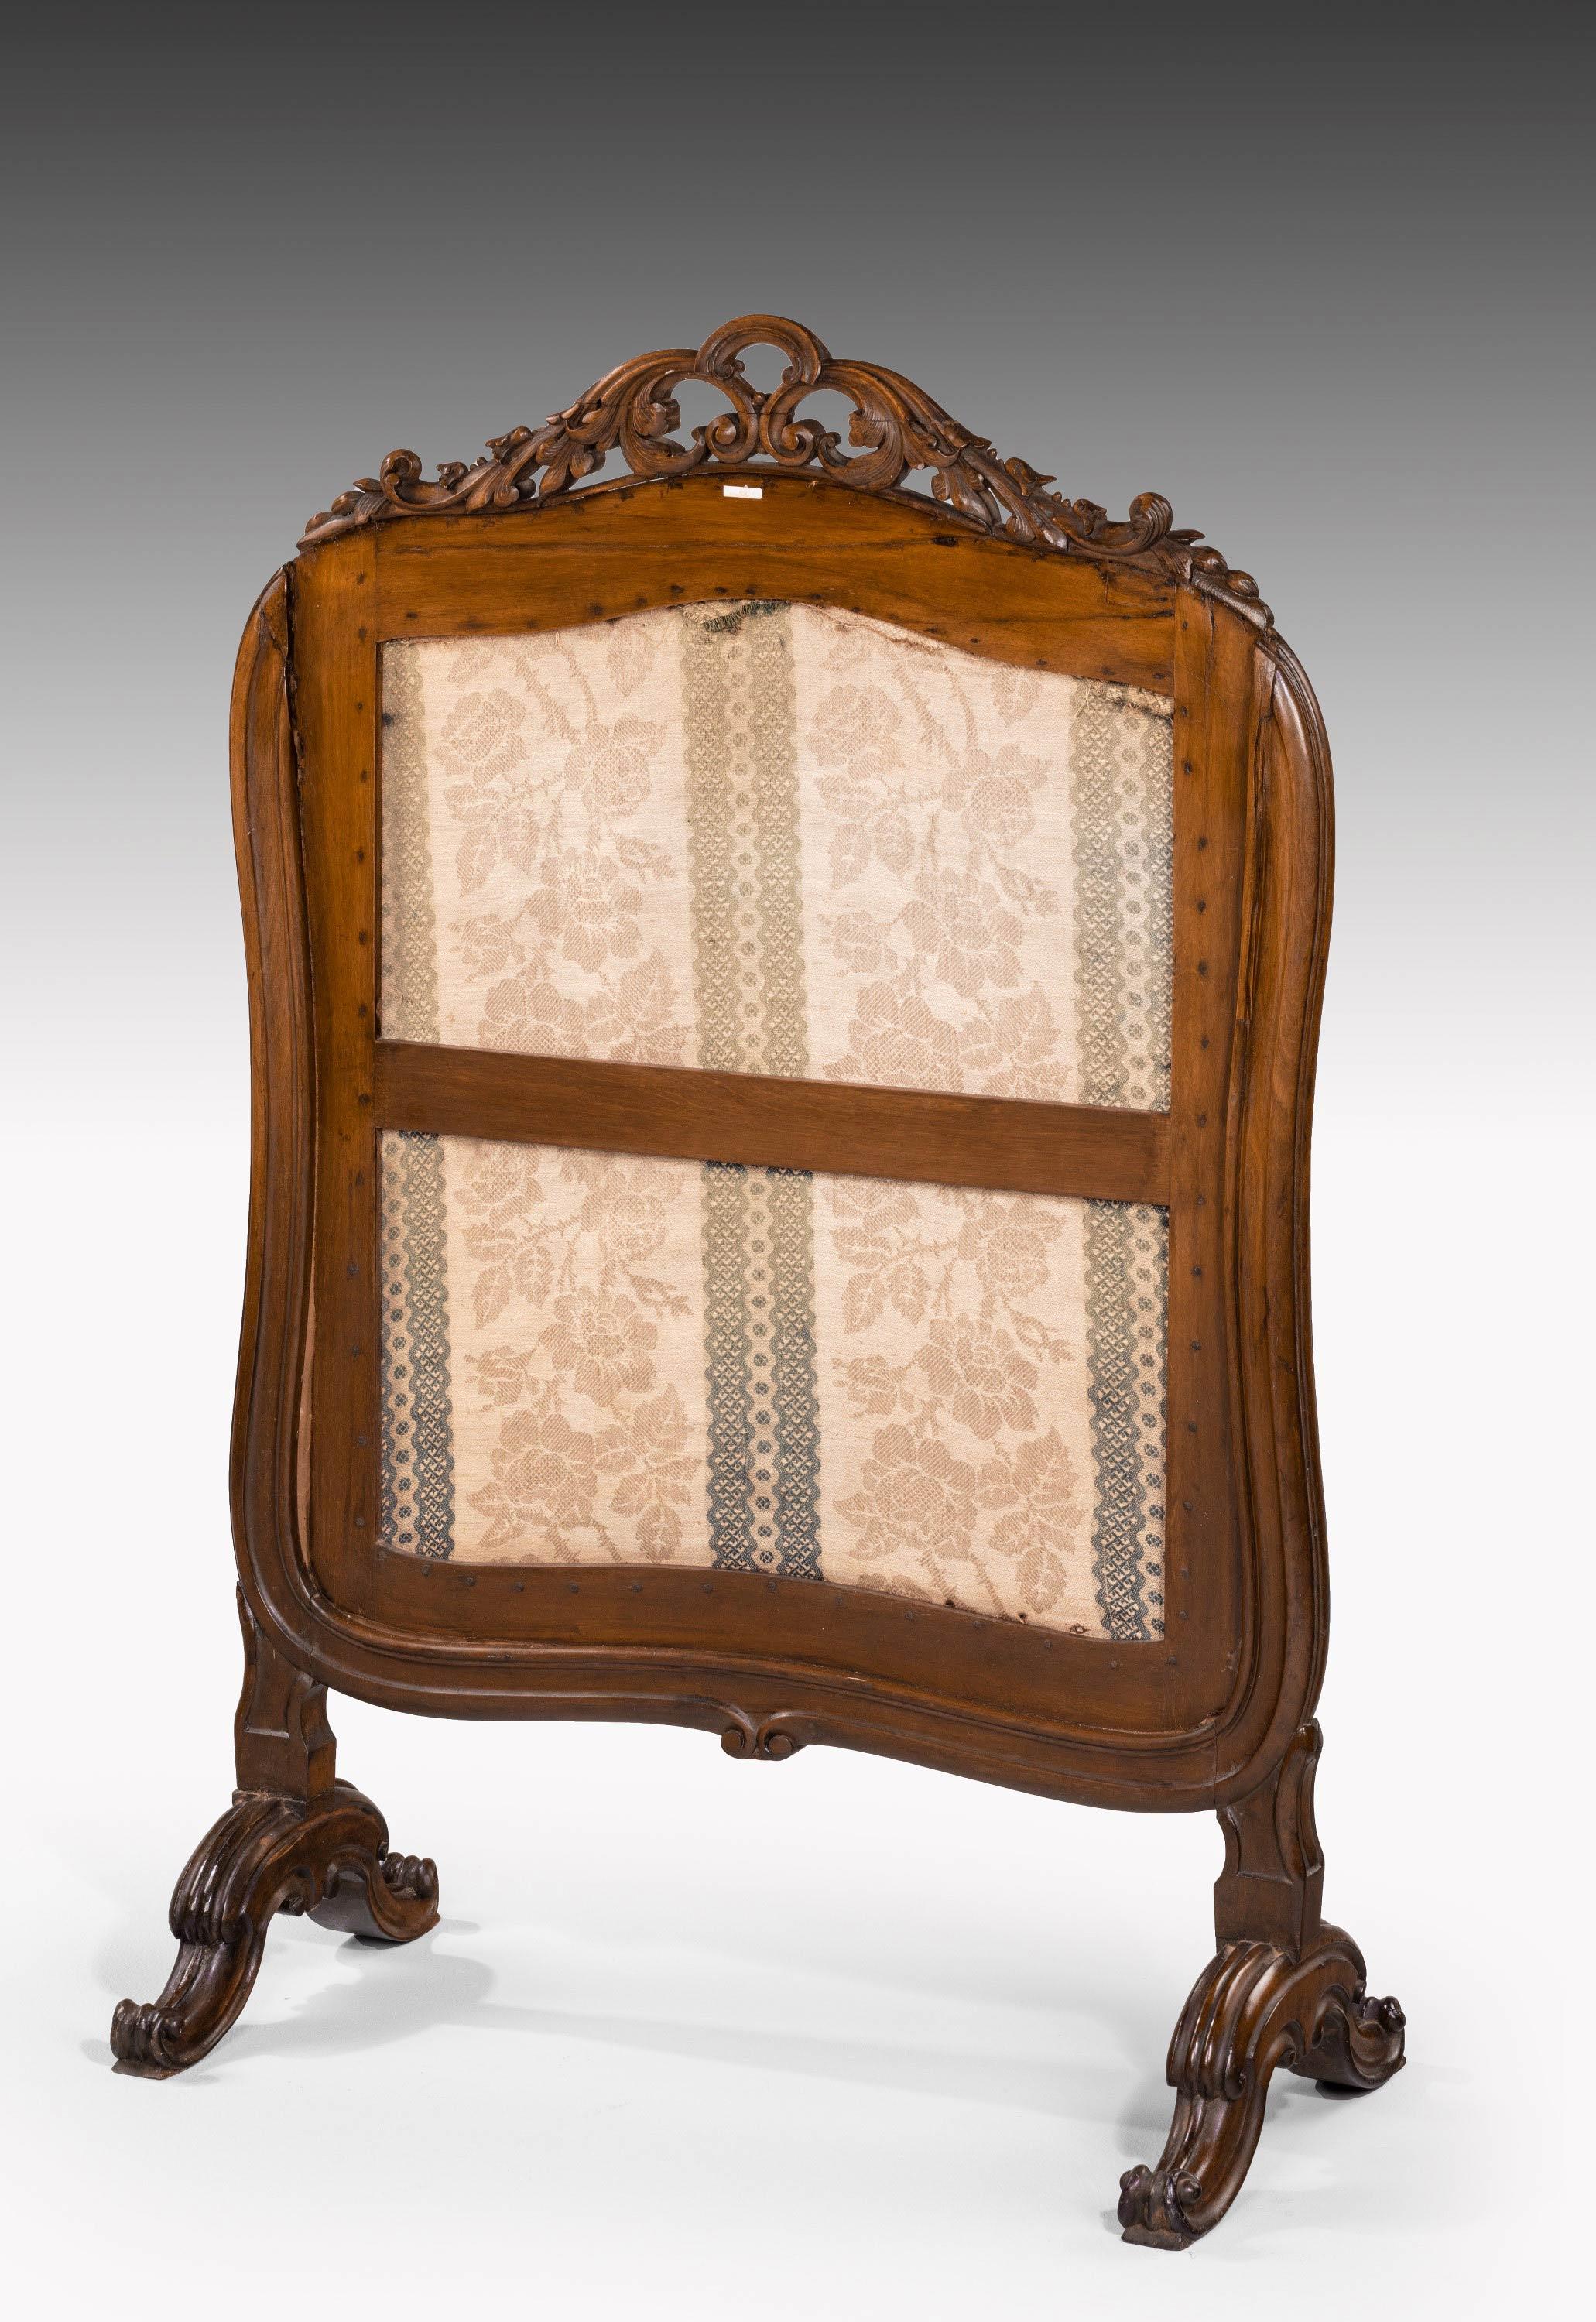 English A Very Shapely Mid-19th Century Mahogany Fire Screen For Sale